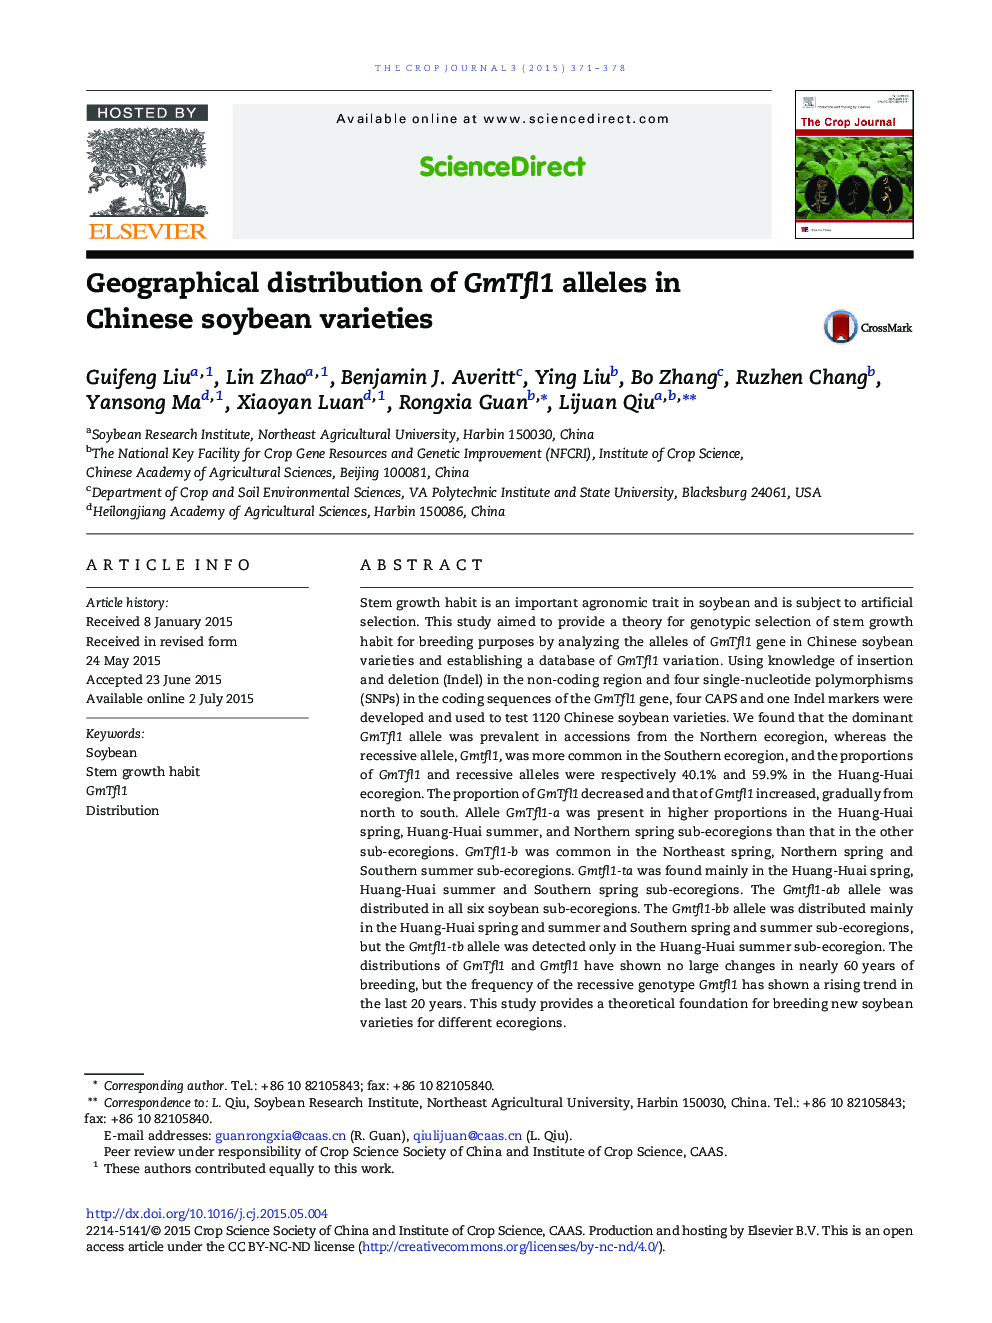 Geographical distribution of GmTfl1 alleles in Chinese soybean varieties 